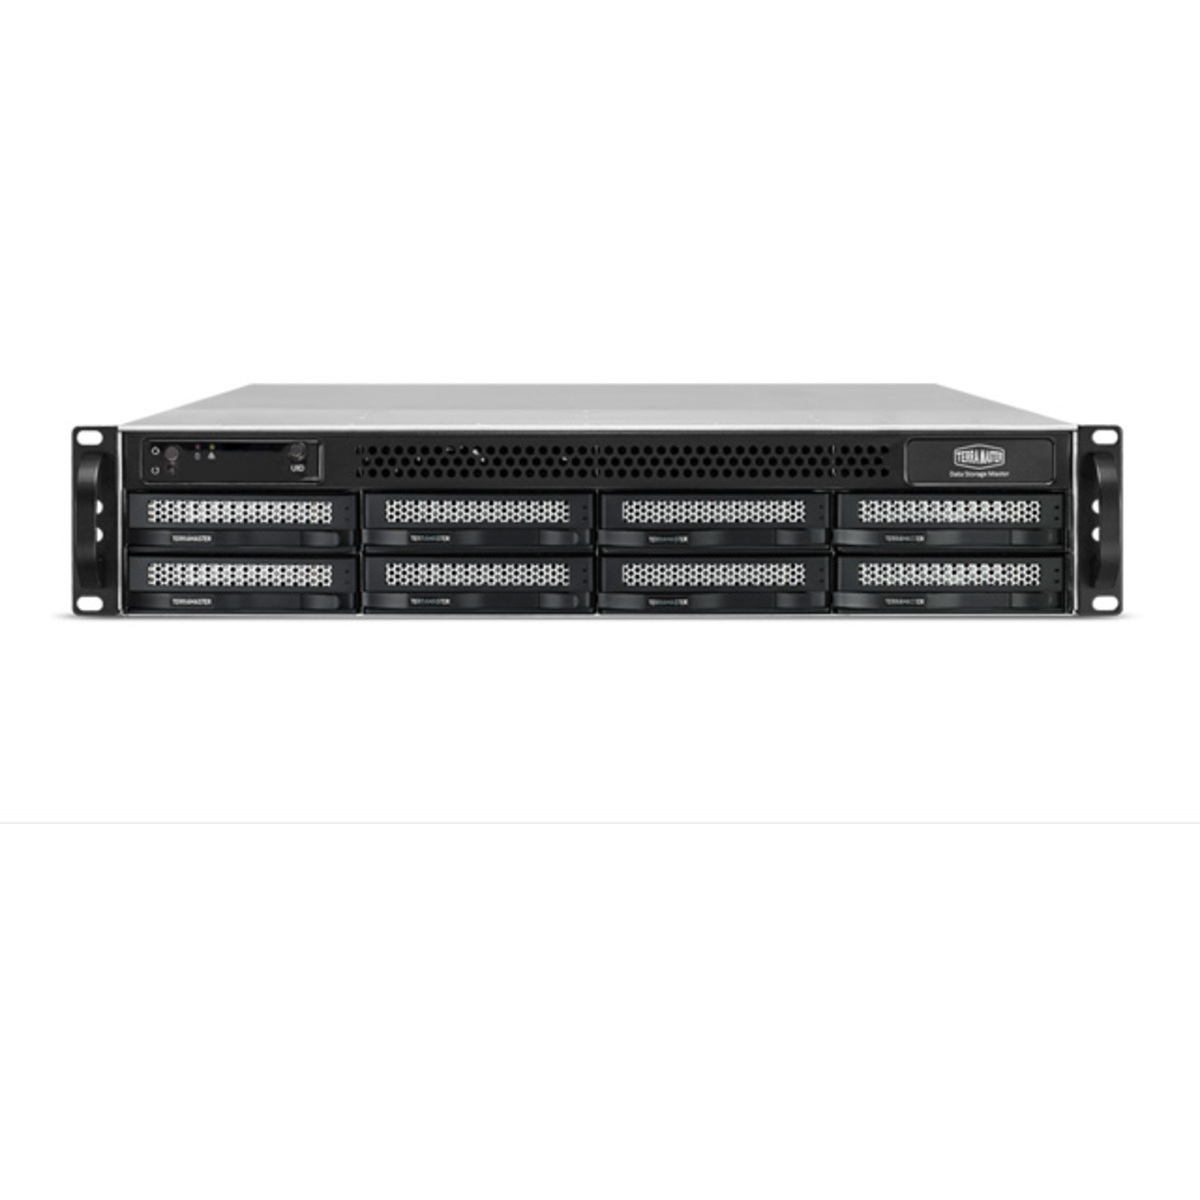 TerraMaster U8-423 32tb 8-Bay RackMount Multimedia / Power User / Business NAS - Network Attached Storage Device 4x8tb Western Digital Red Plus WD80EFPX 3.5 7200rpm SATA 6Gb/s HDD NAS Class Drives Installed - Burn-In Tested - FREE RAM UPGRADE U8-423